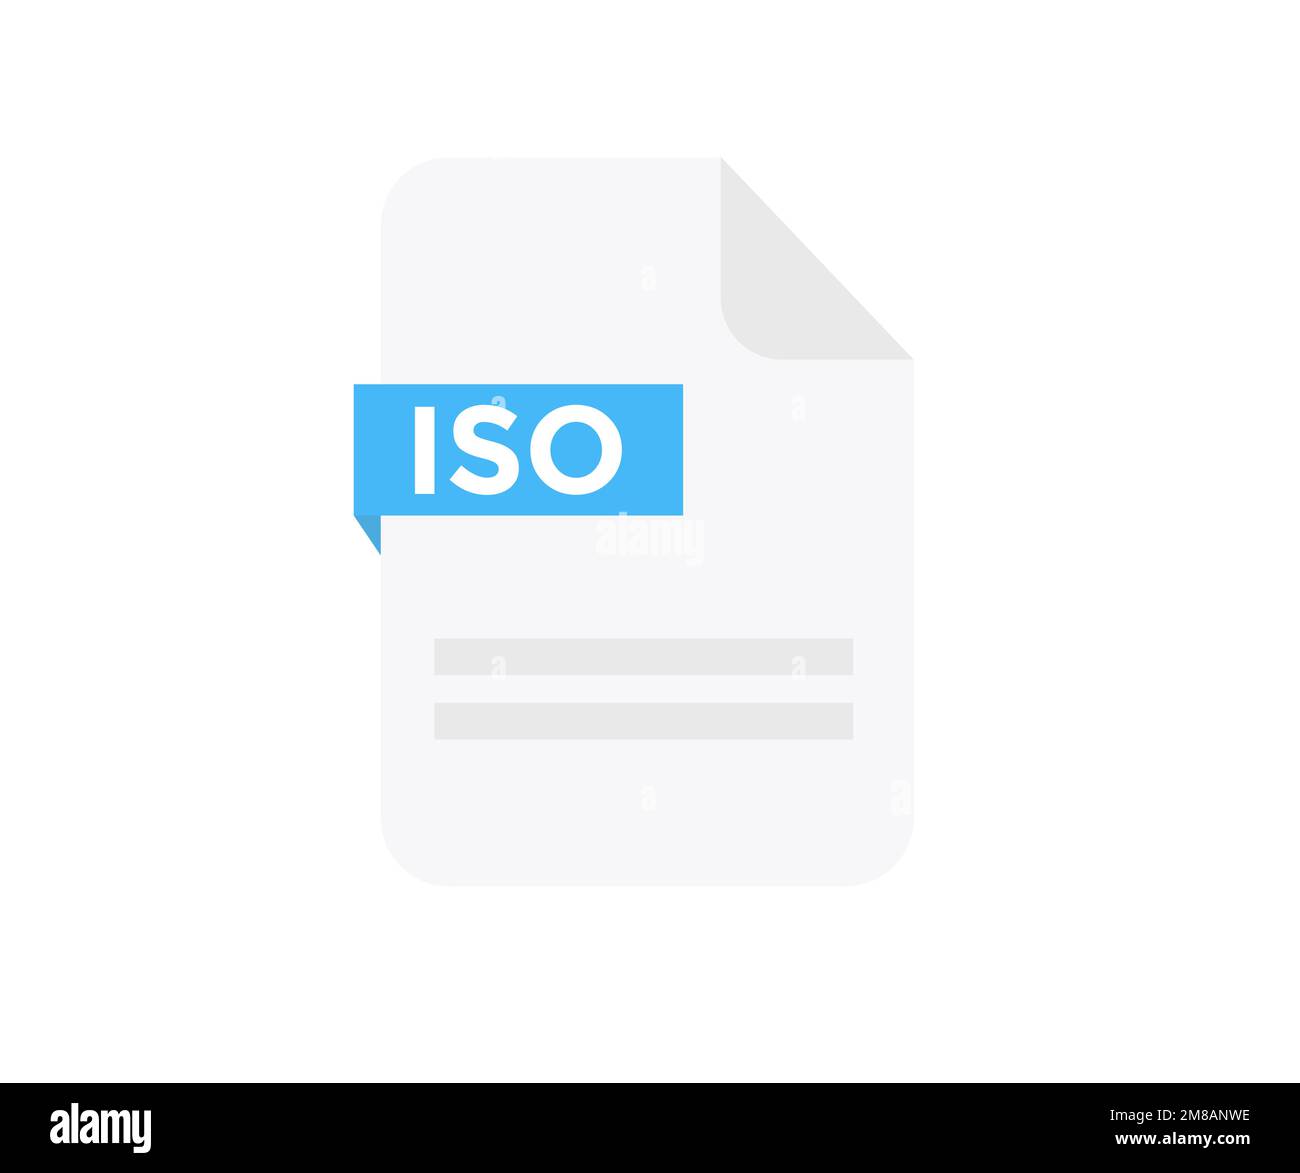 File format ISO logo design. Document file icon. Element for applications, web sites & data services. Format and extension of documents vector design. Stock Vector